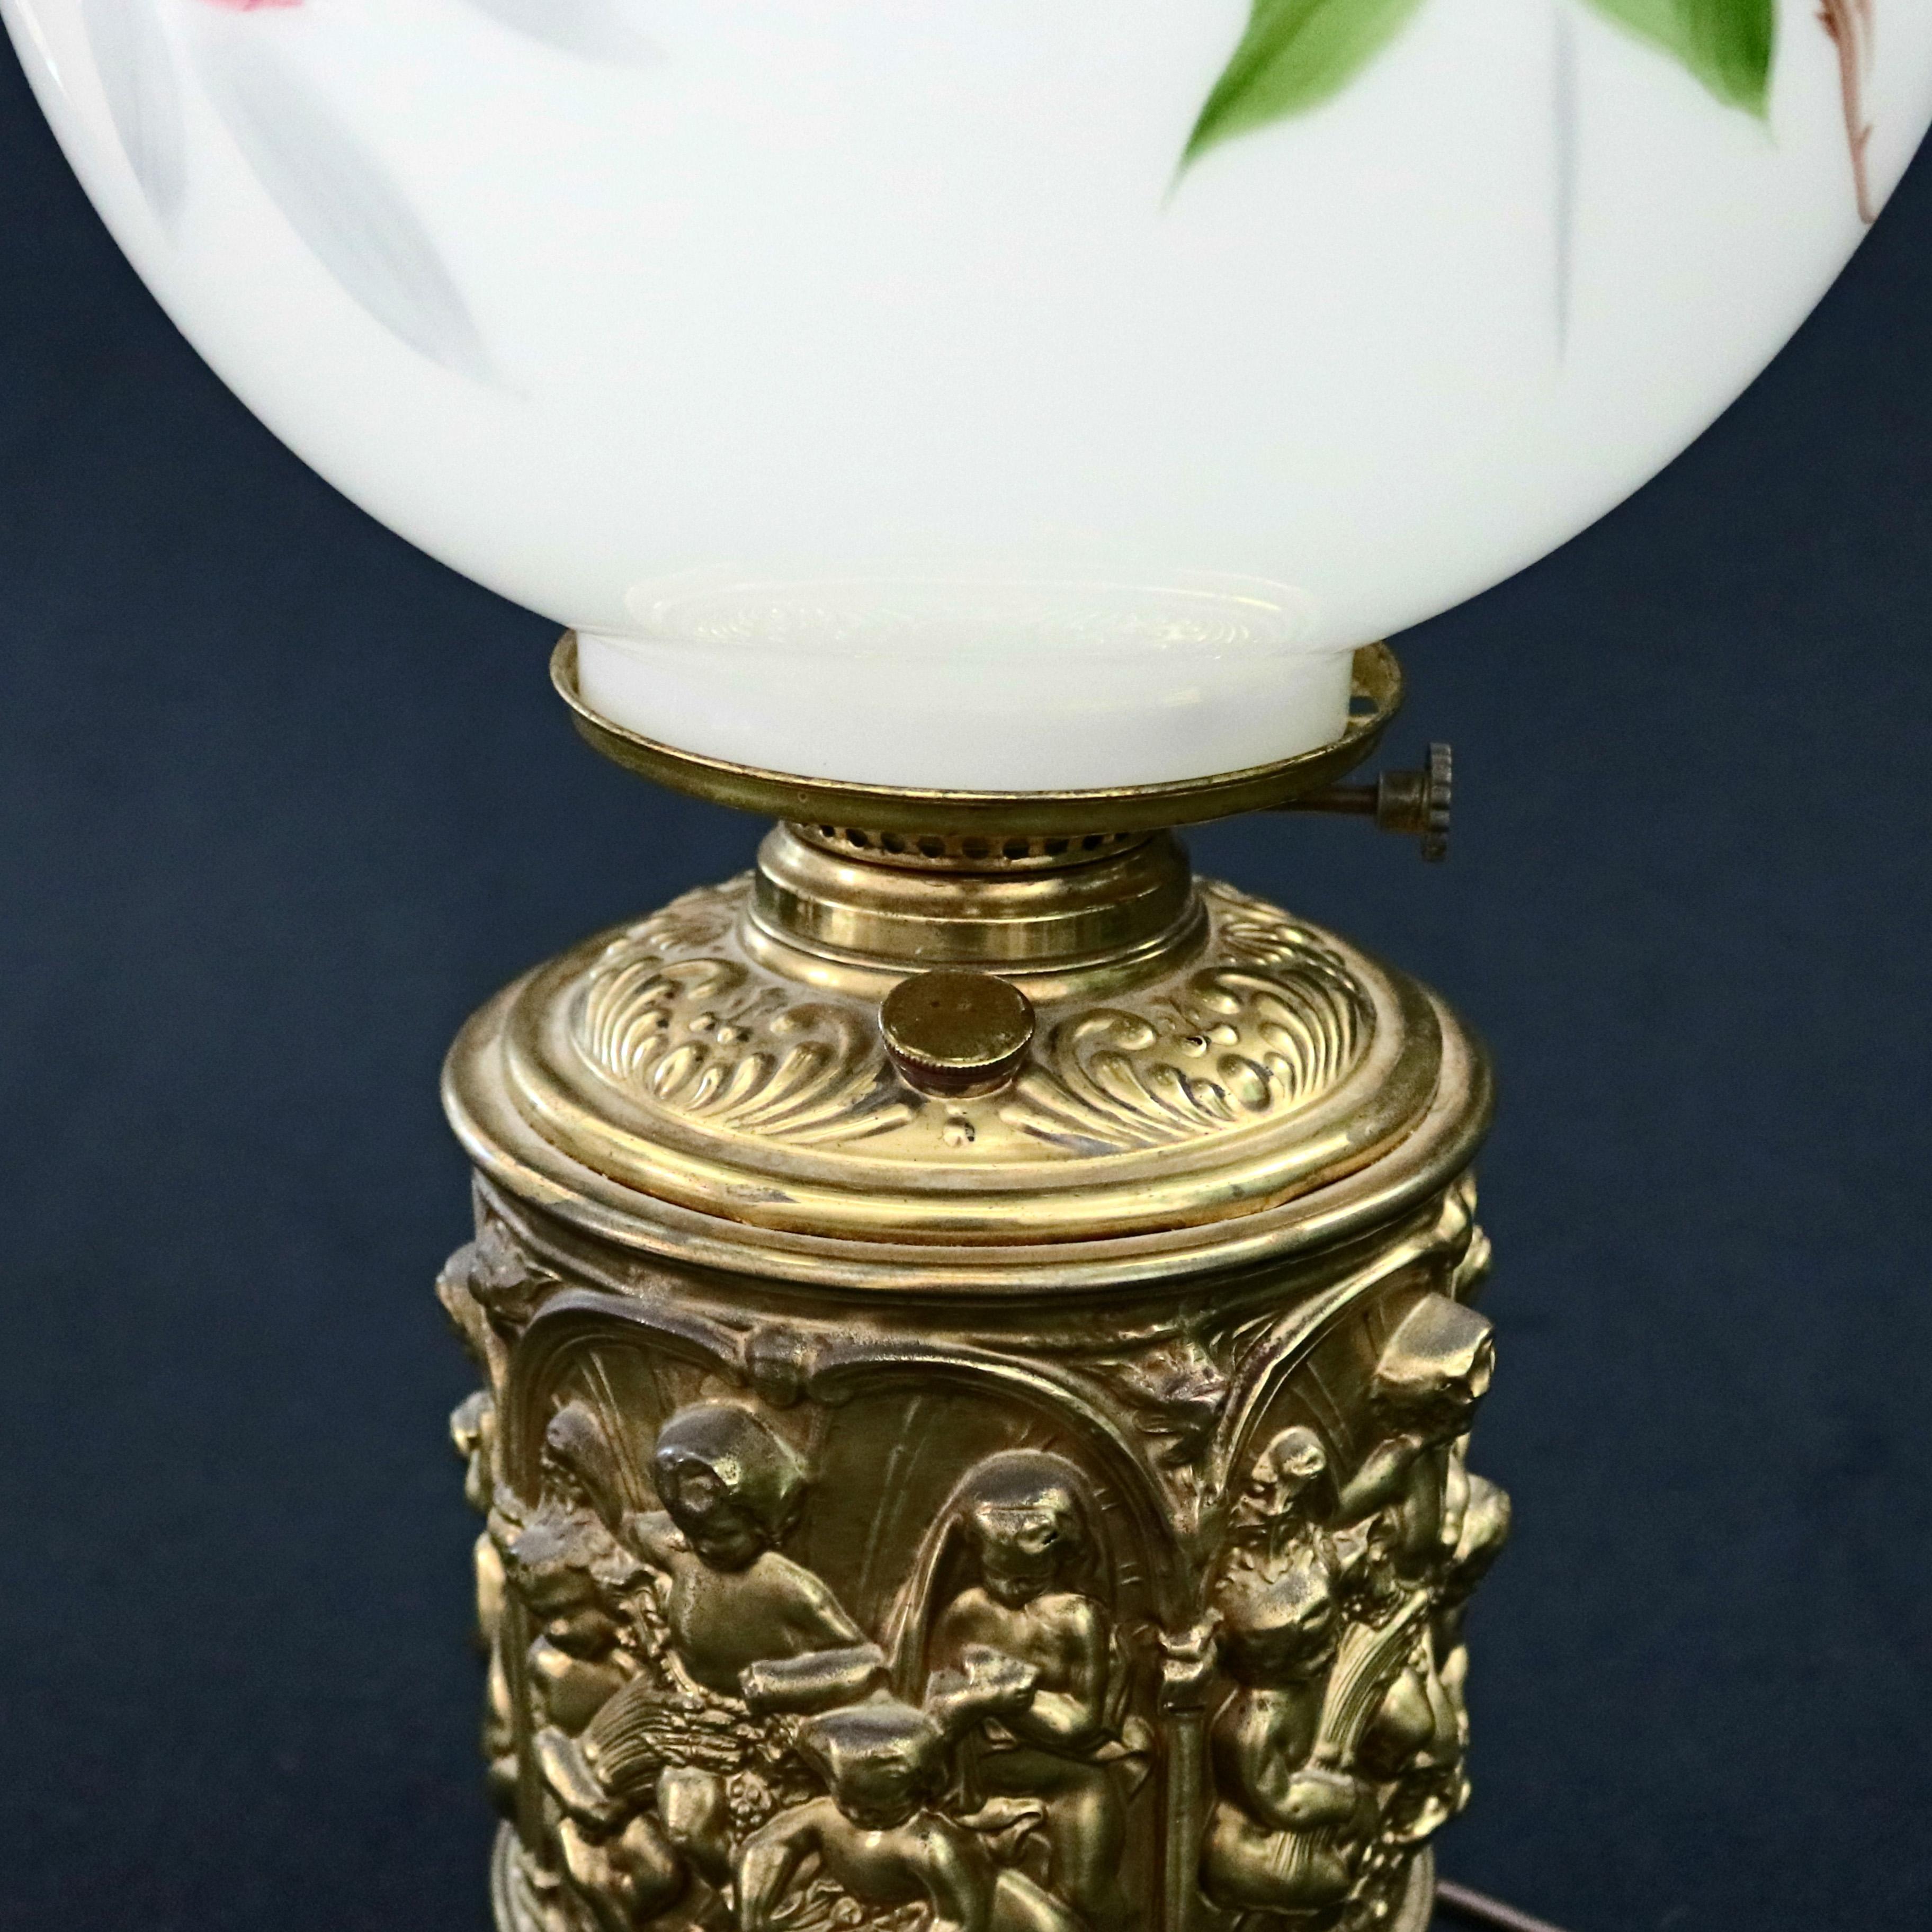 19th Century Classical Cherub Gone with the Wind Embossed Brass Parlor Lamp, circa 1880